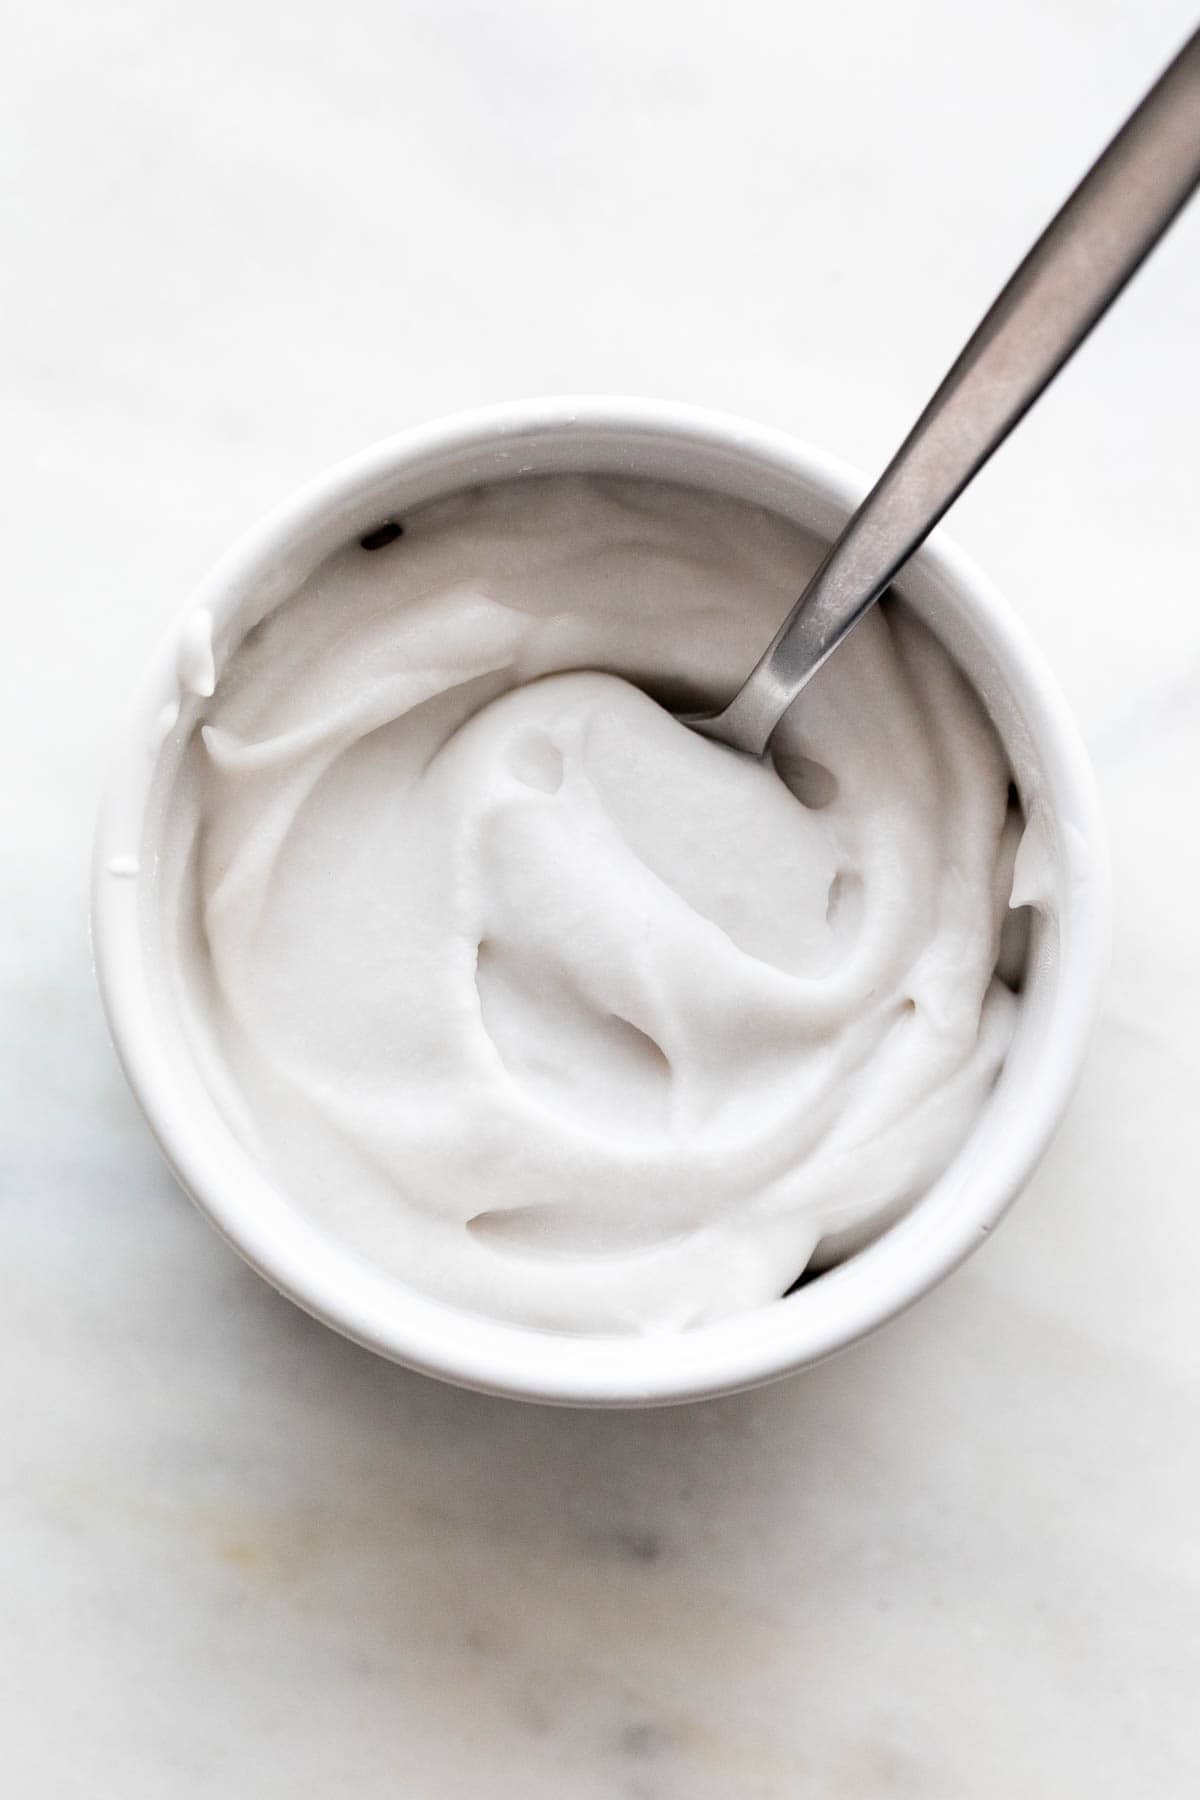 Vegan whipped cream in a bowl with a spoon submerged.